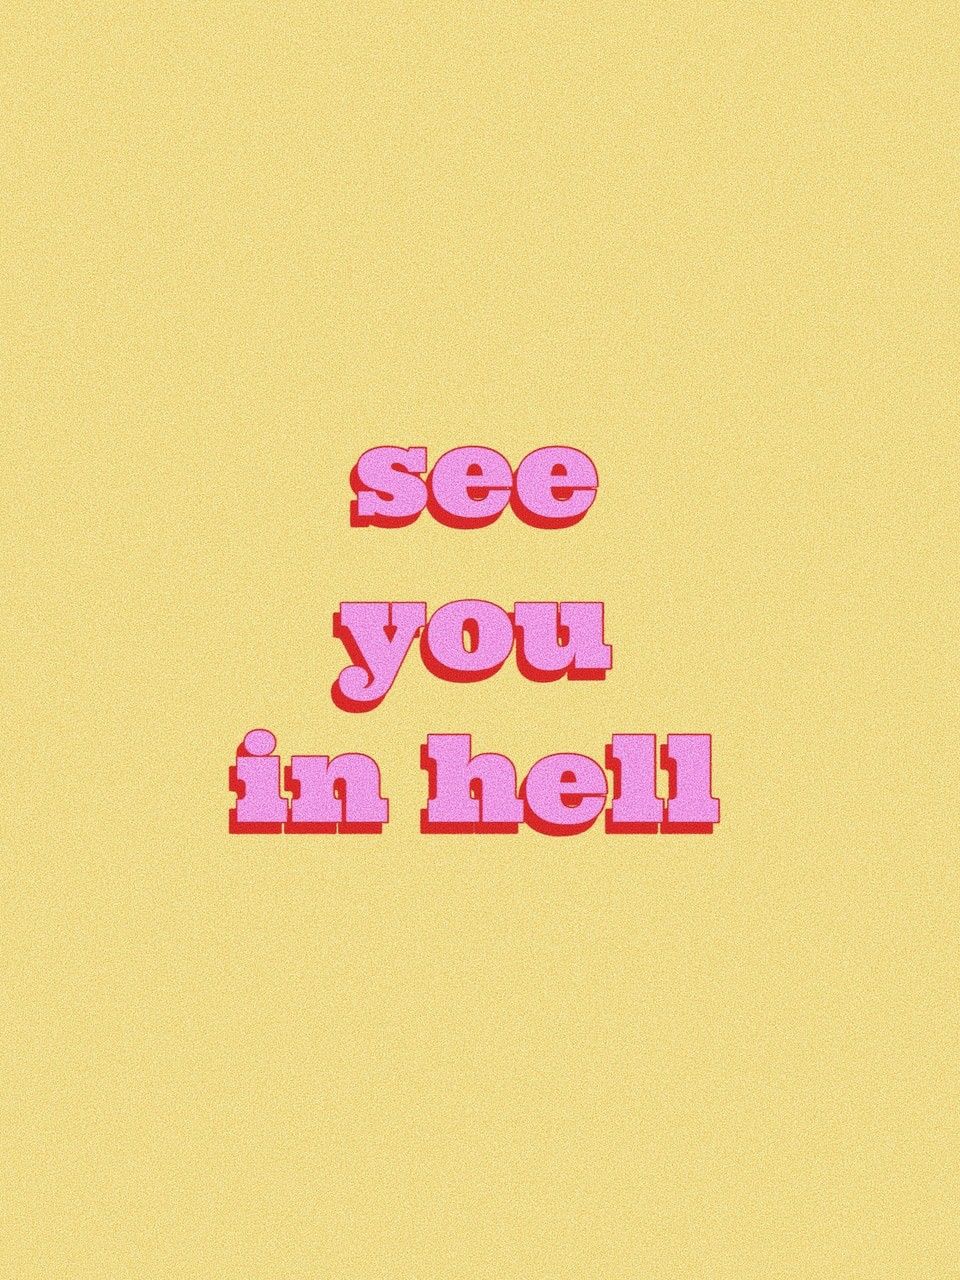 See you in hell¡ discovered